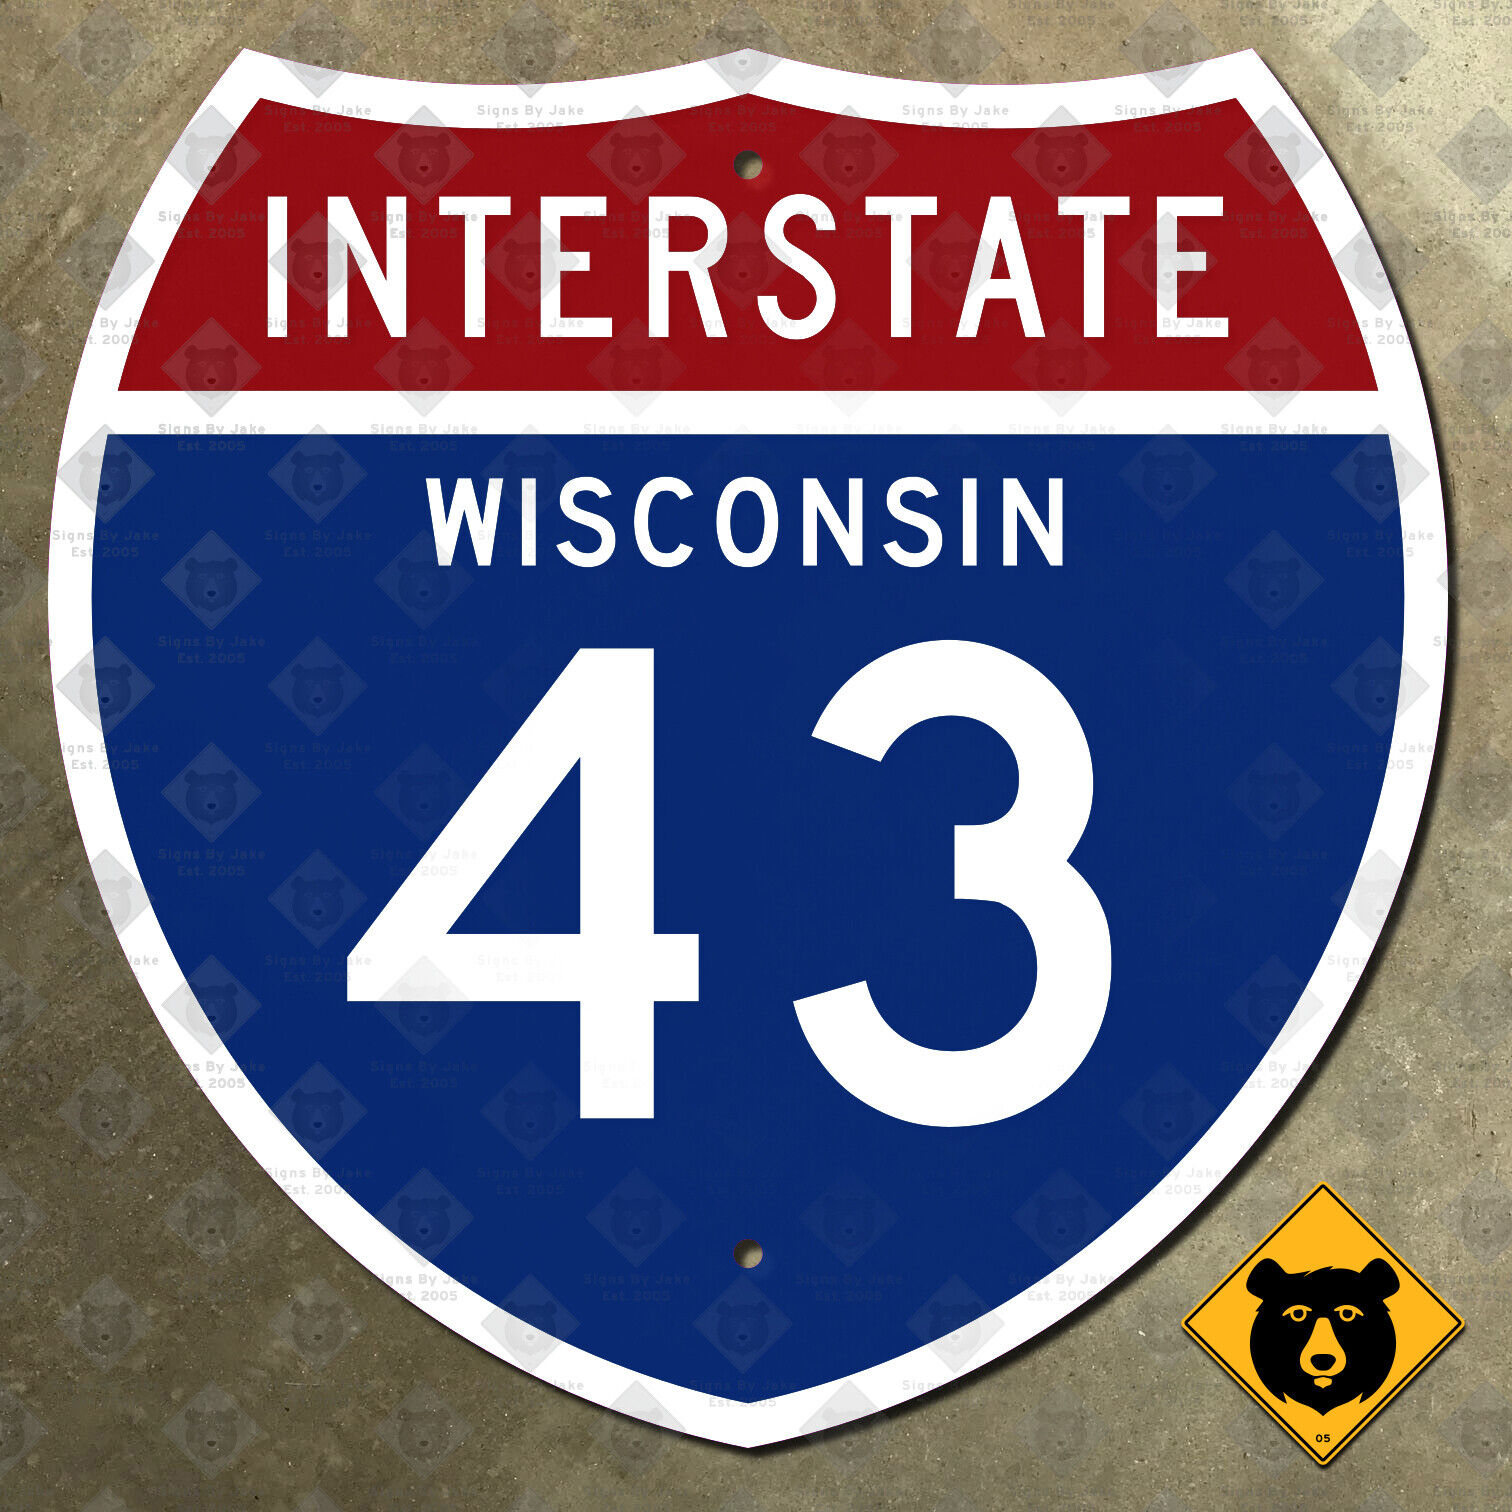 Wisconsin interstate route 43 highway marker road sign 1957 Green Bay 12x12